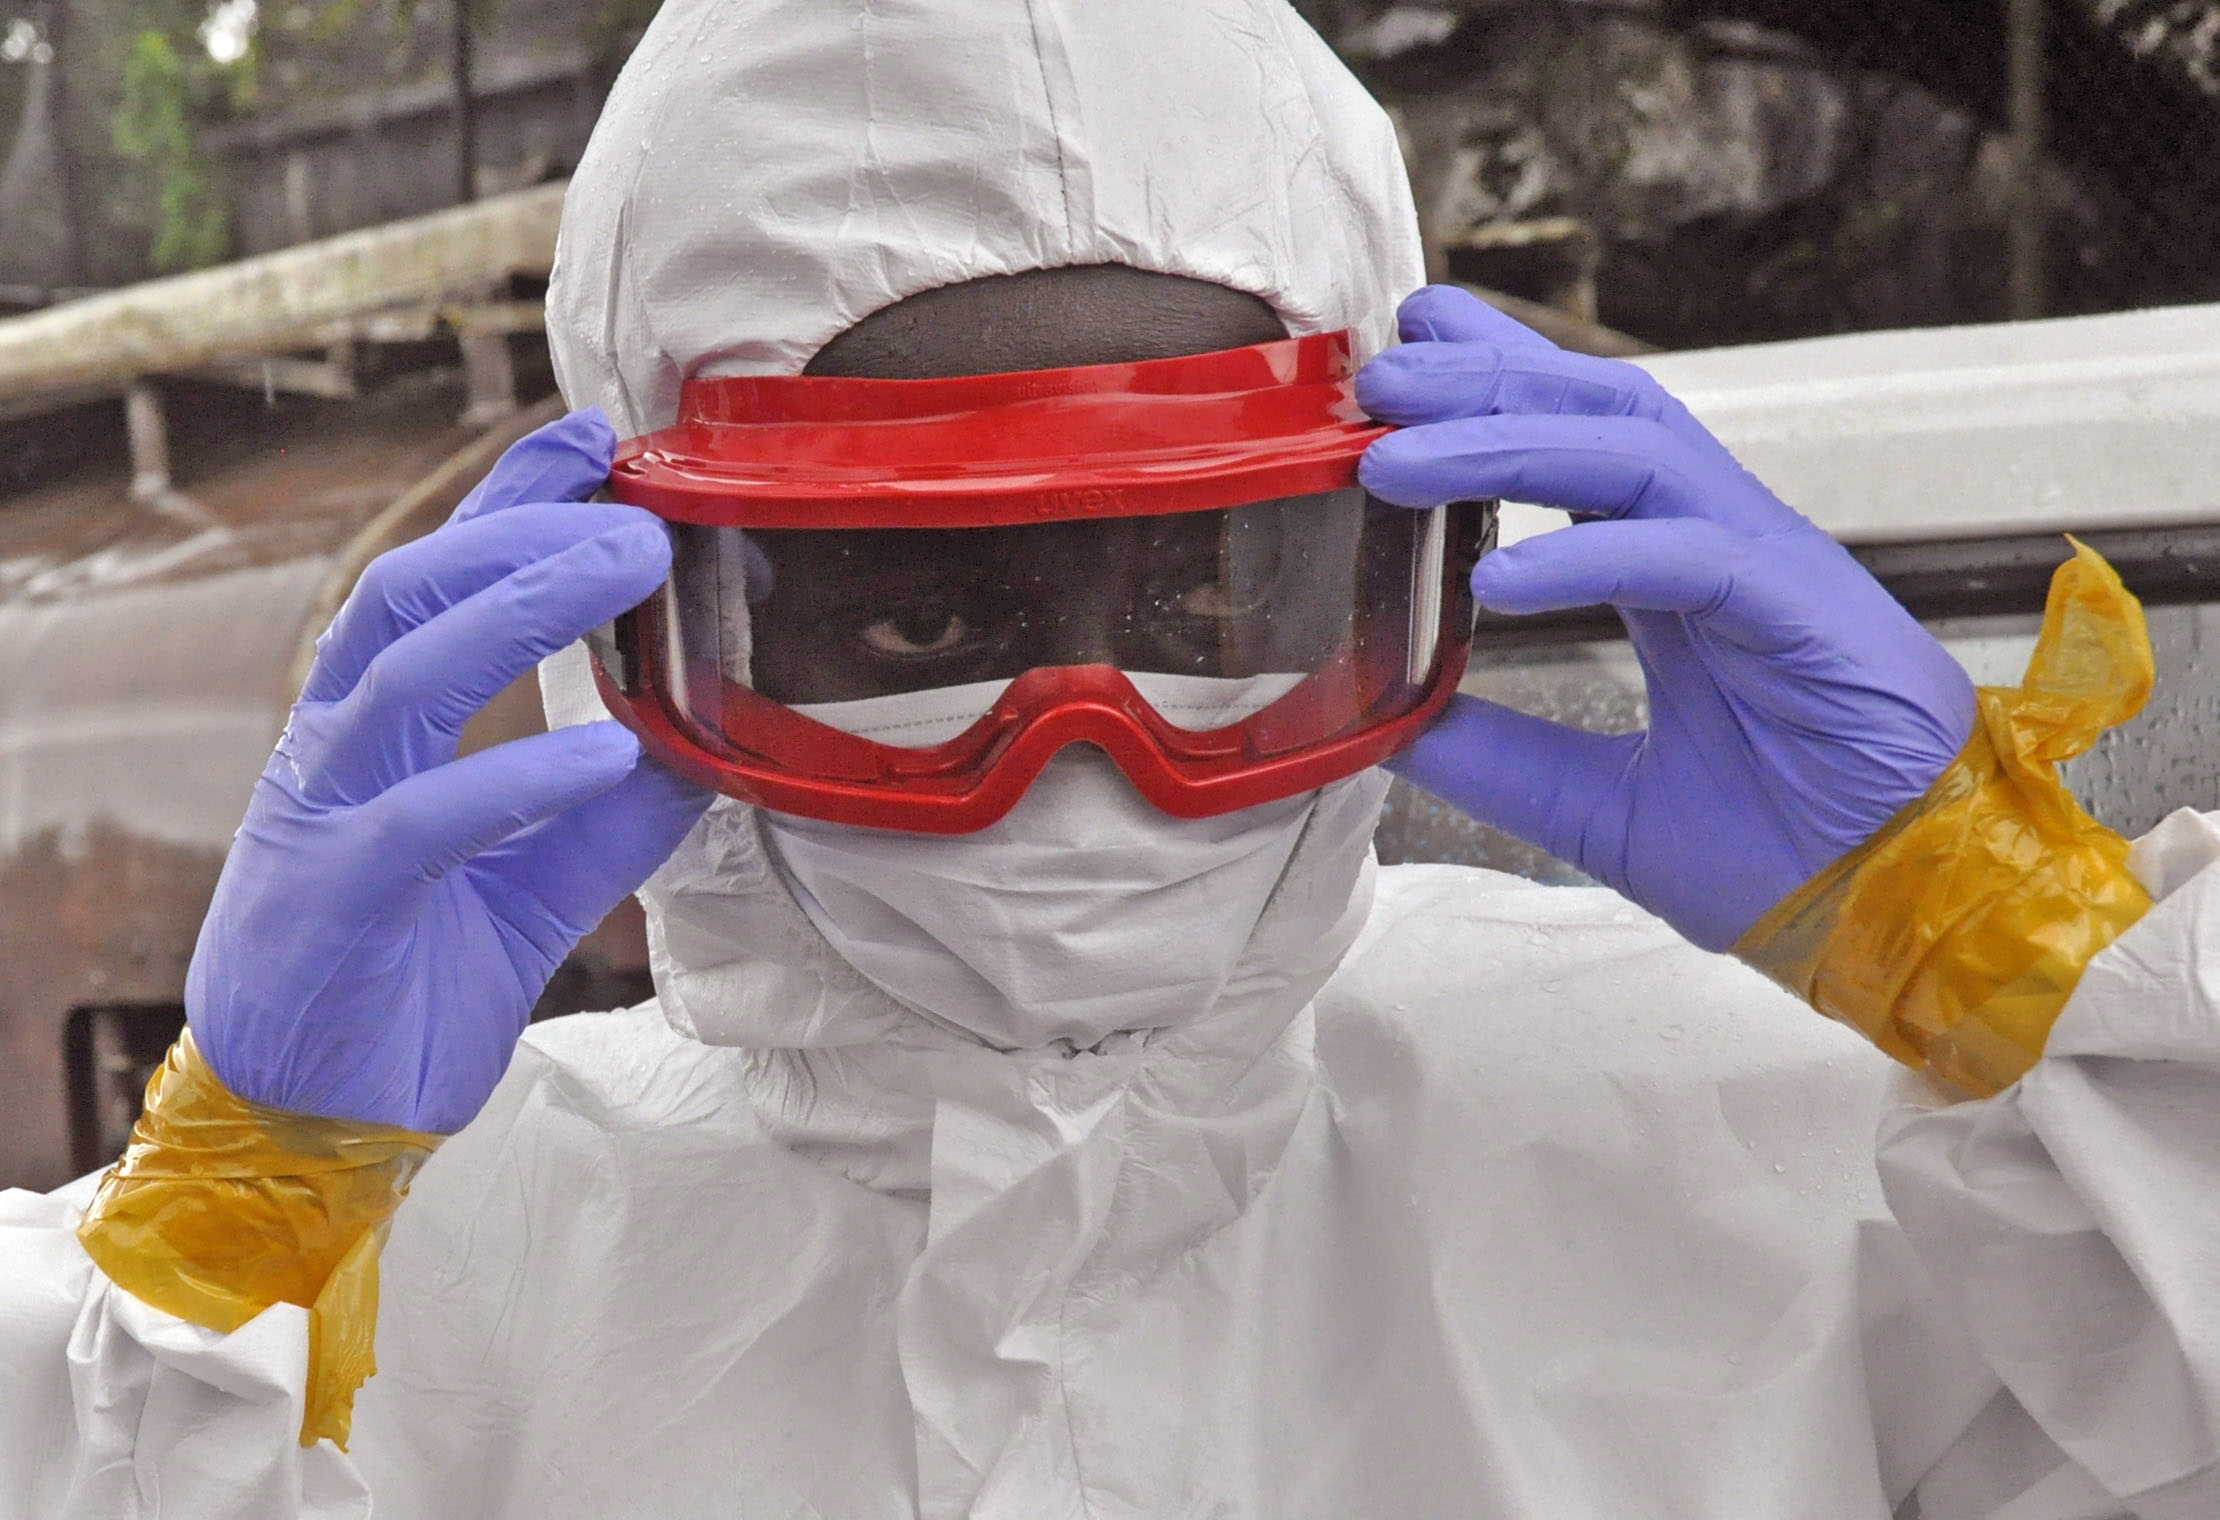 A health worker prepares his protective gear before moving the body of a man believed to have died from the Ebola virus Friday in Monrovia, Liberia.